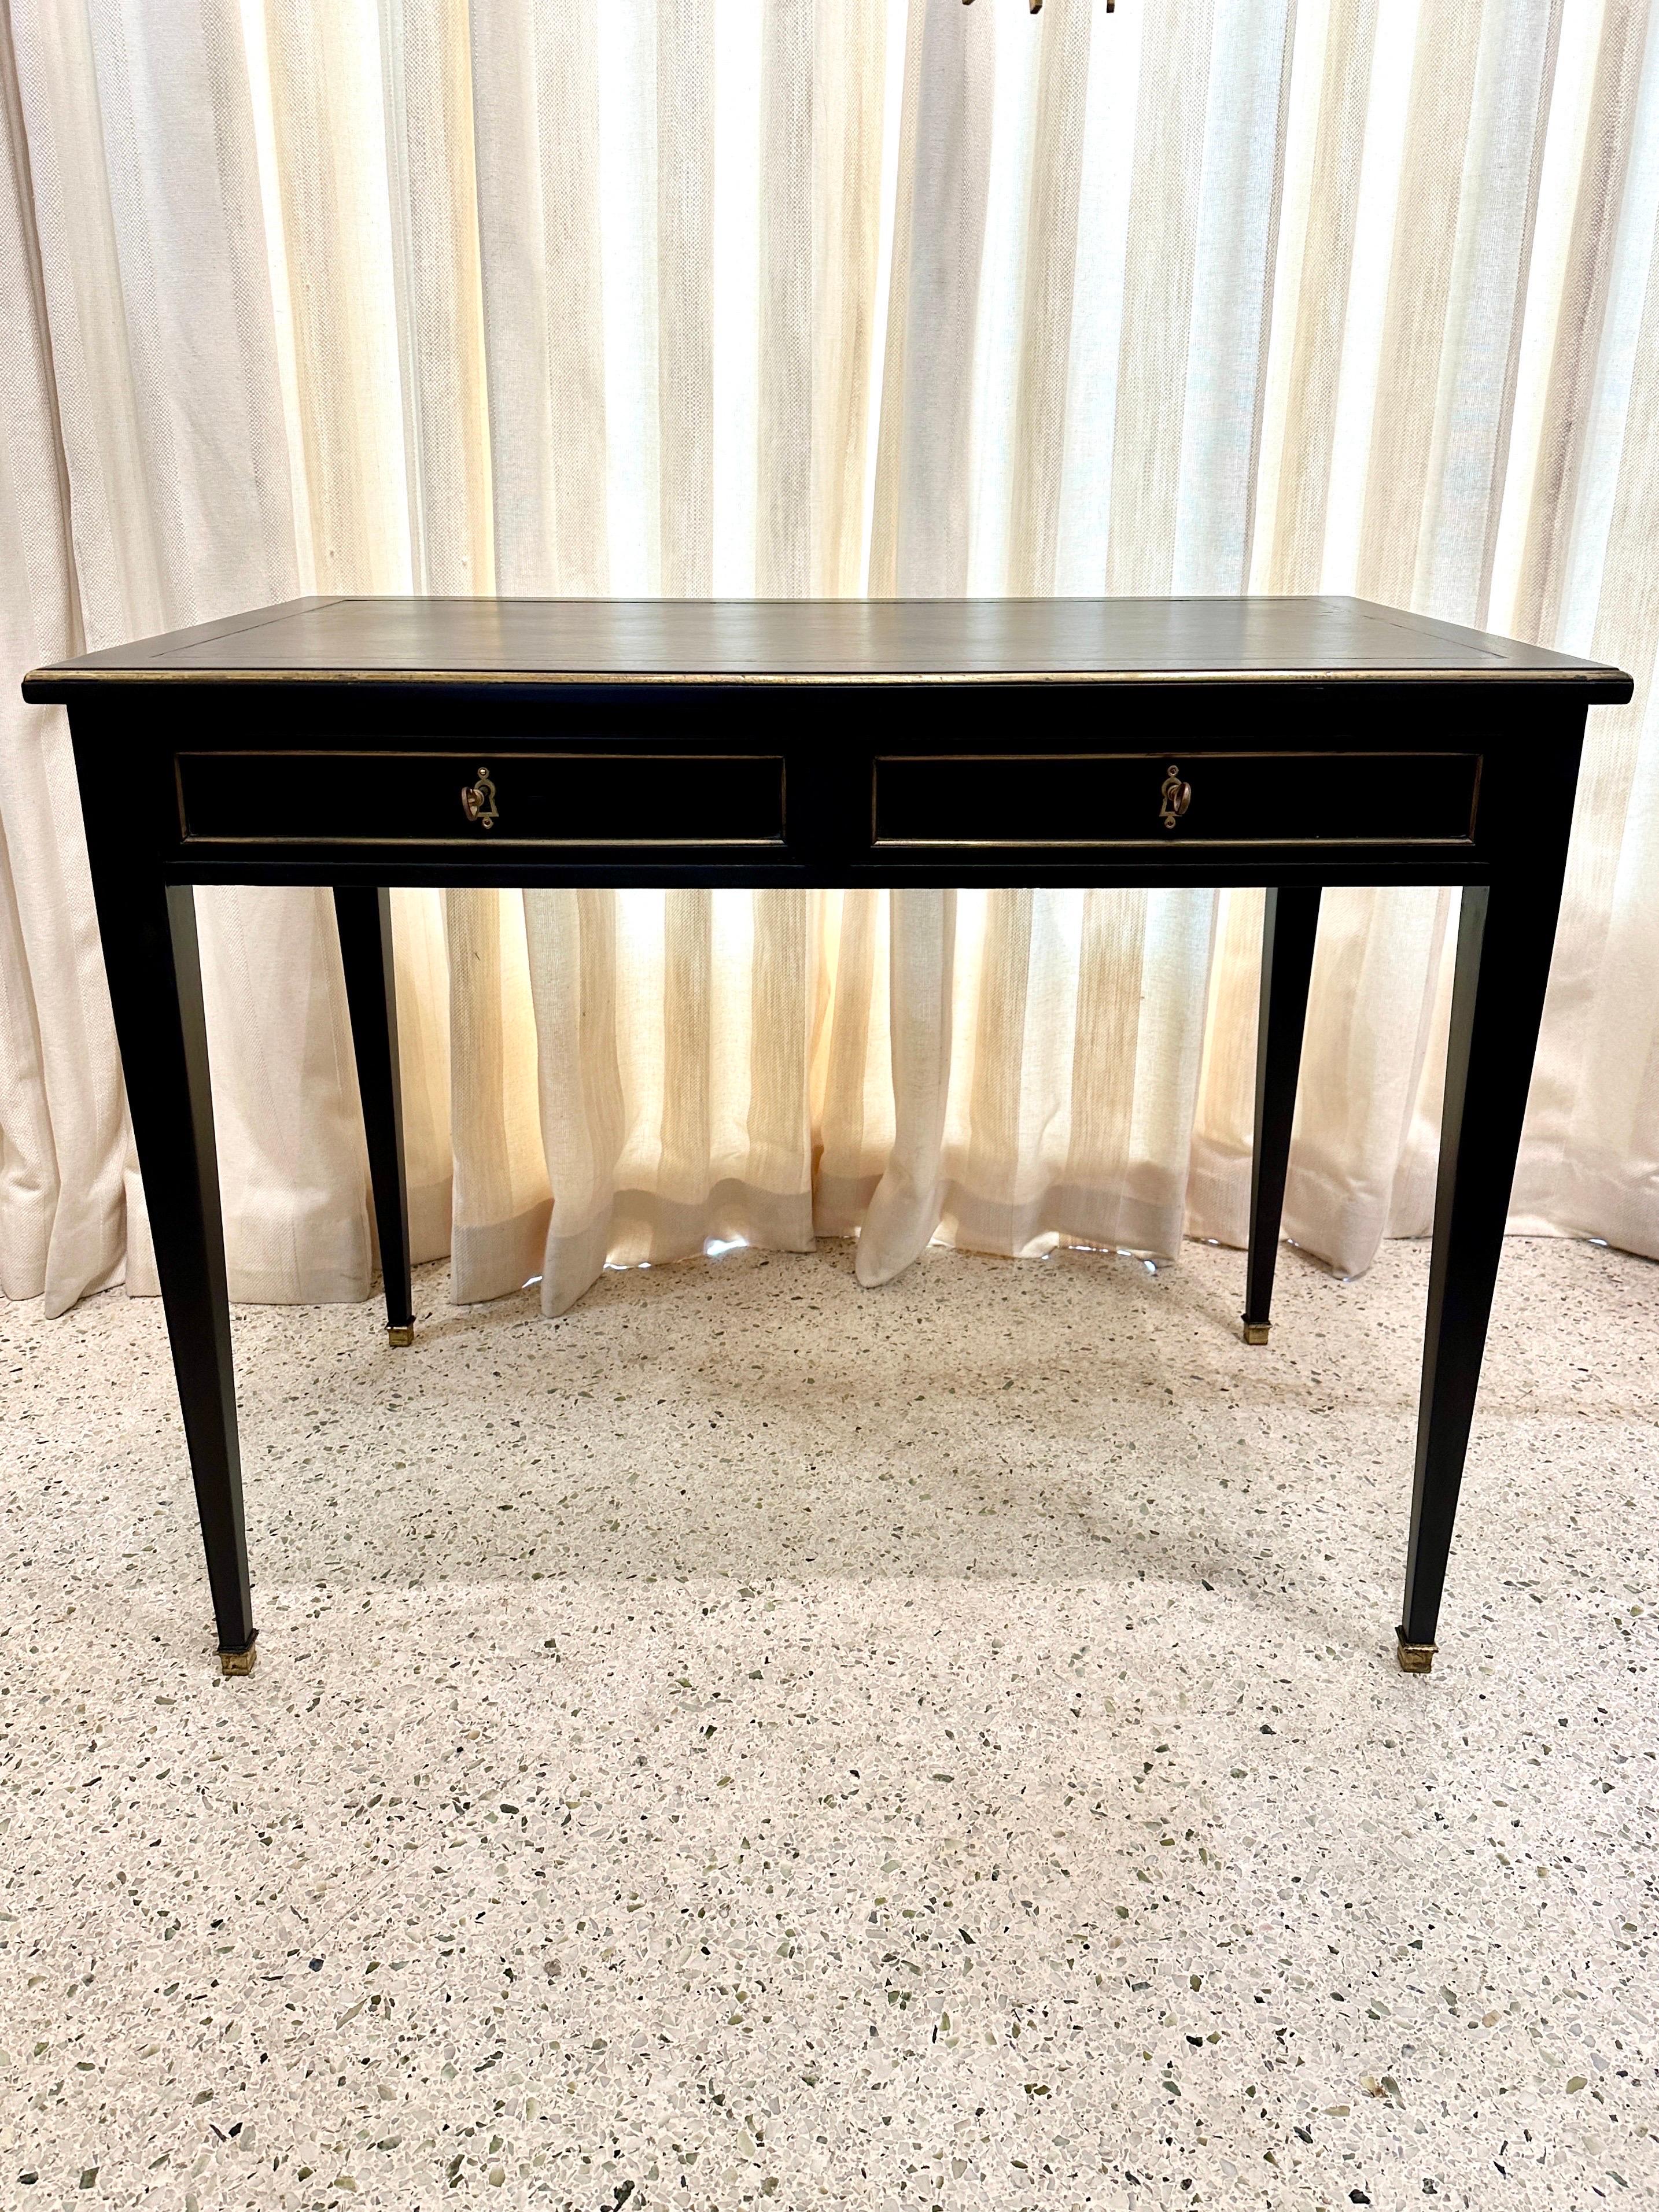 A wonderful early 20th Century French Louis XVI style writing desk in ebonized black finish.  Dating to around the 1940’s with original brass mounts and leather top.  This is the epitome of elegance and sophistication - the Antique French Louis XVI